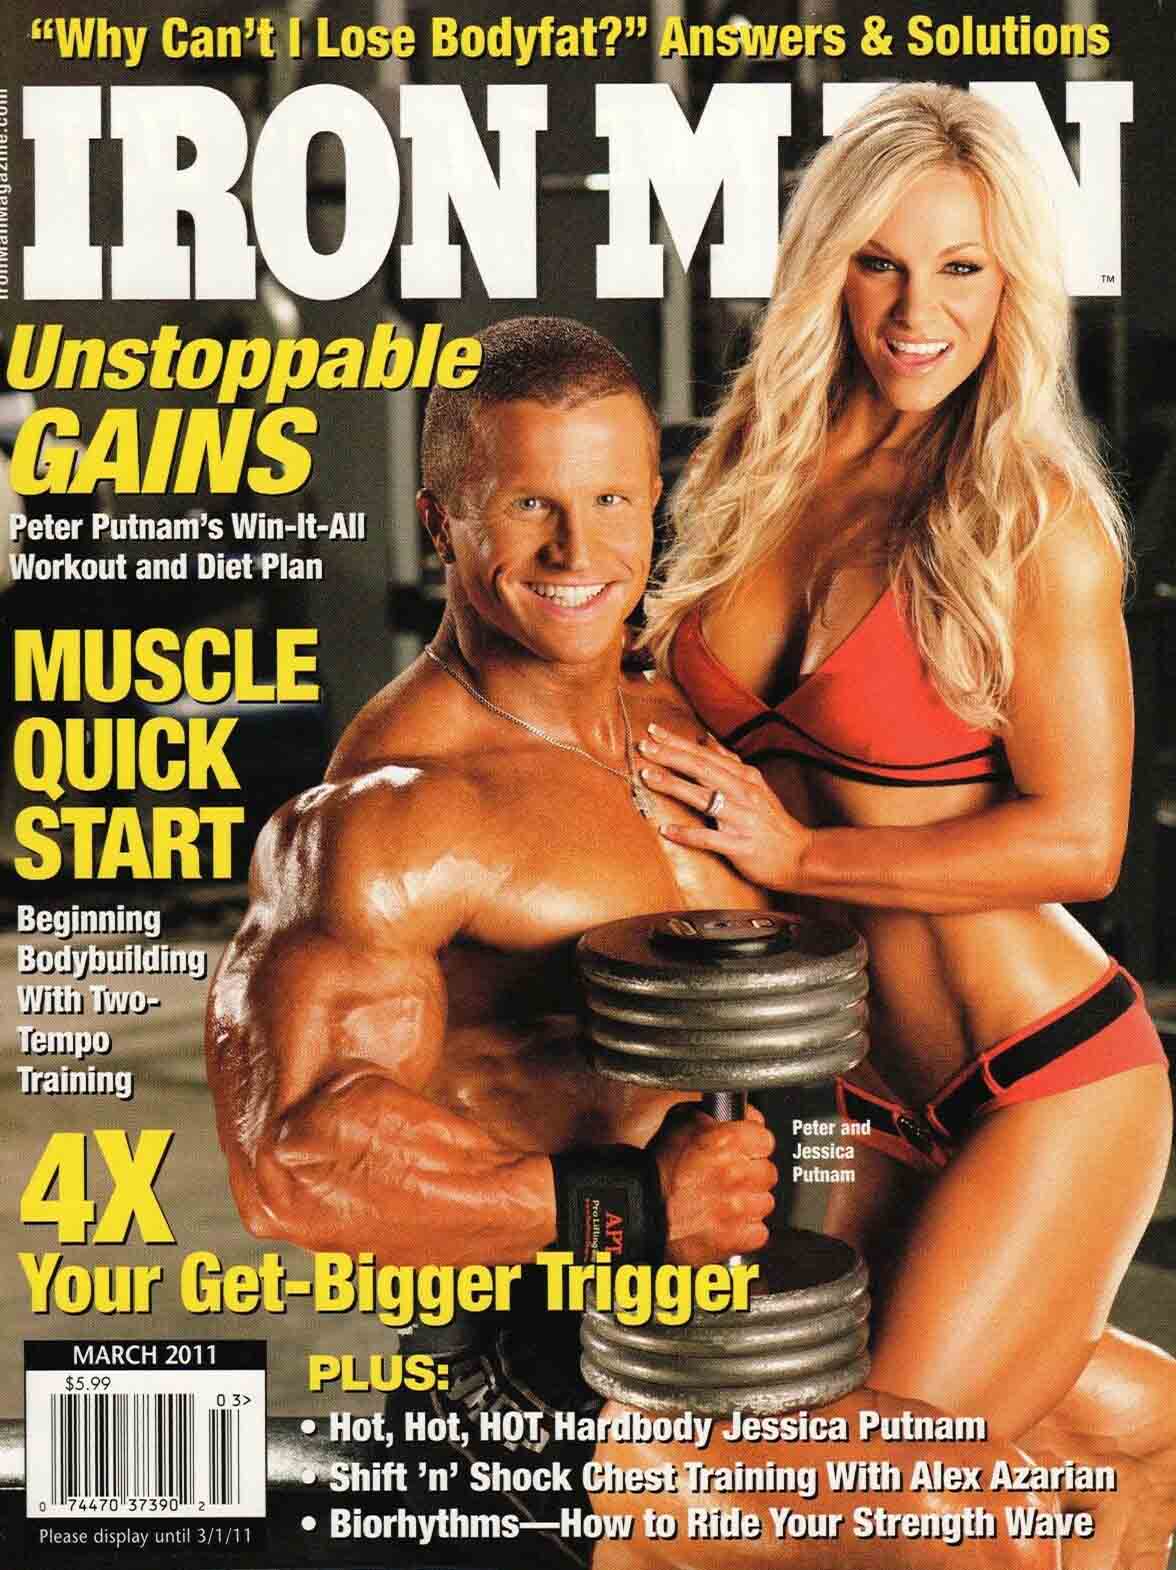 Ironman March 2011 magazine back issue Ironman magizine back copy Ironman March 2011 American magazine Back Issue about bodybuilding, weightlifting, and powerlifting. Published by Iron Man Publishing. Why Can't I Lose Bodyfat? Answers & Solutions.